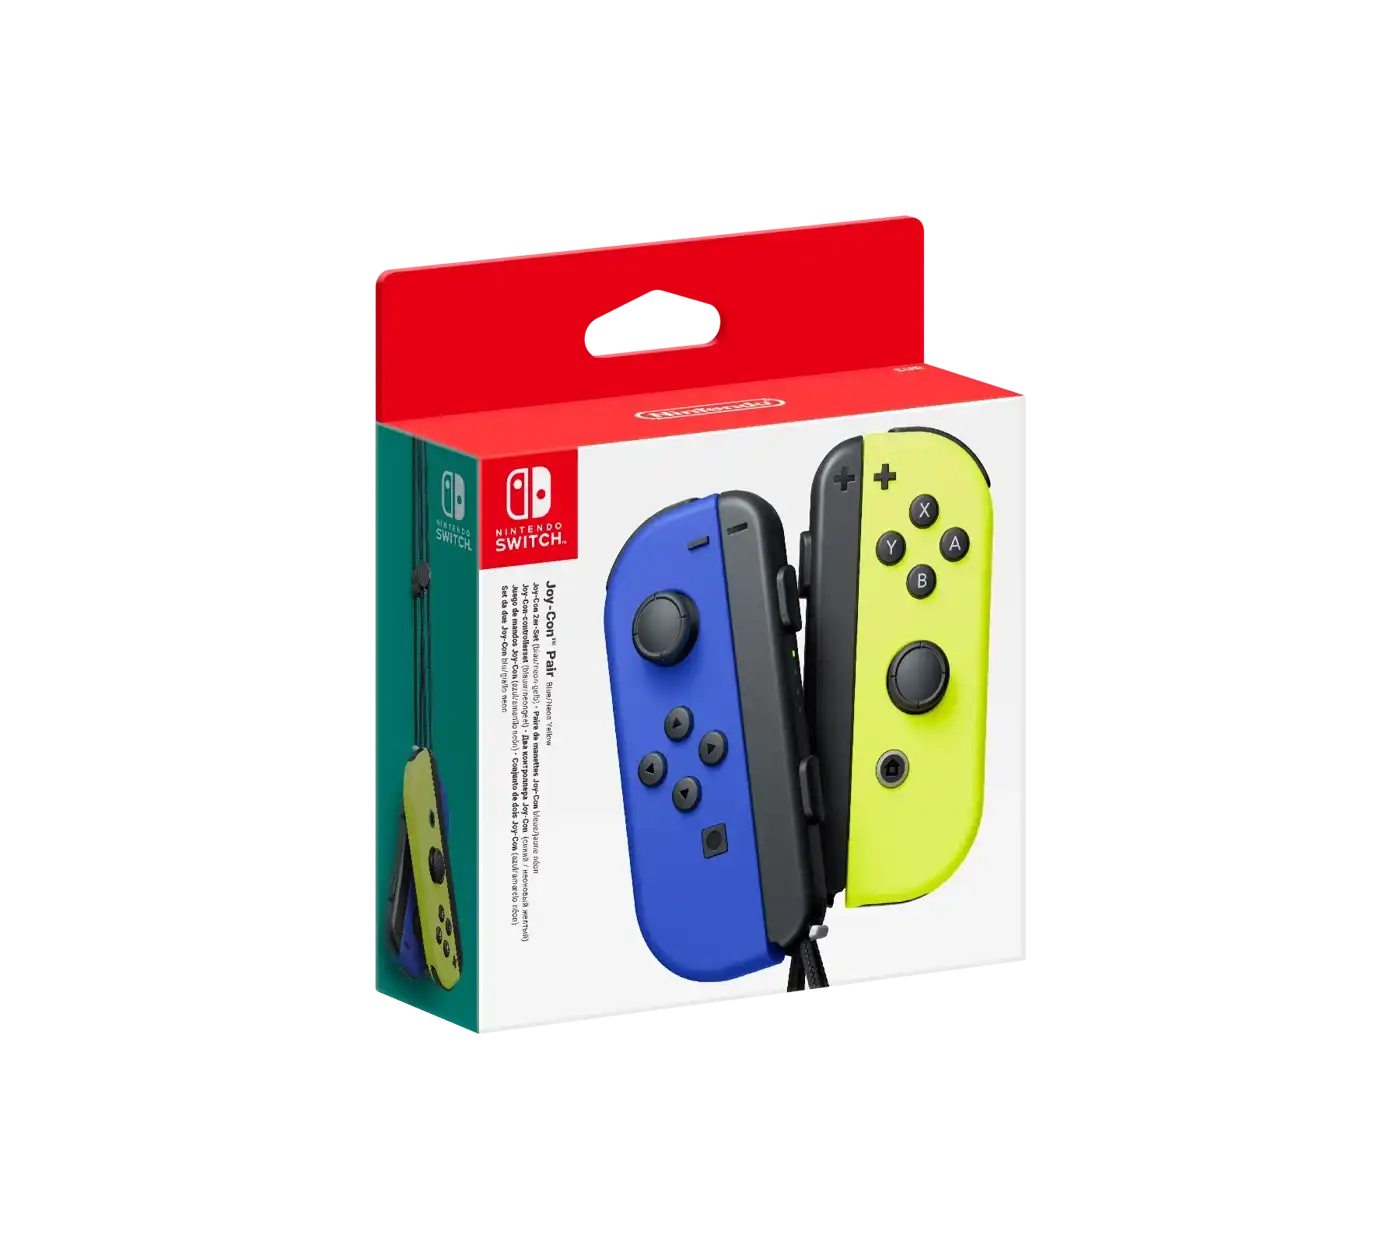 Nintendo Switch 2 Pack Joy-Con Controllers - Neon Blue/Yellow